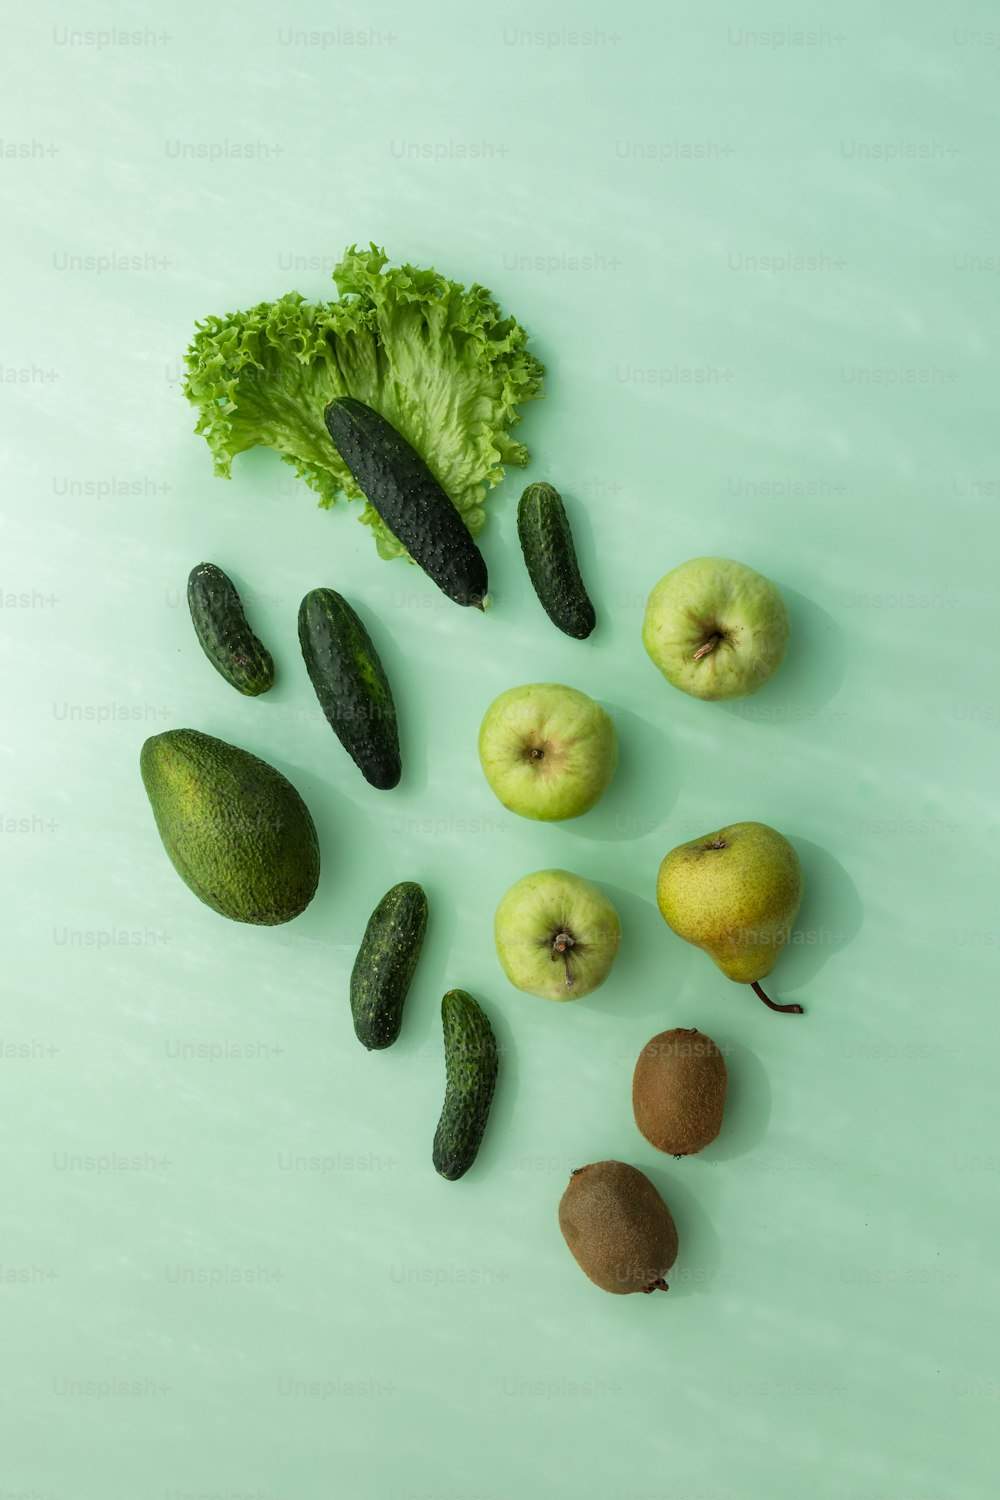 green fruits and vegetables